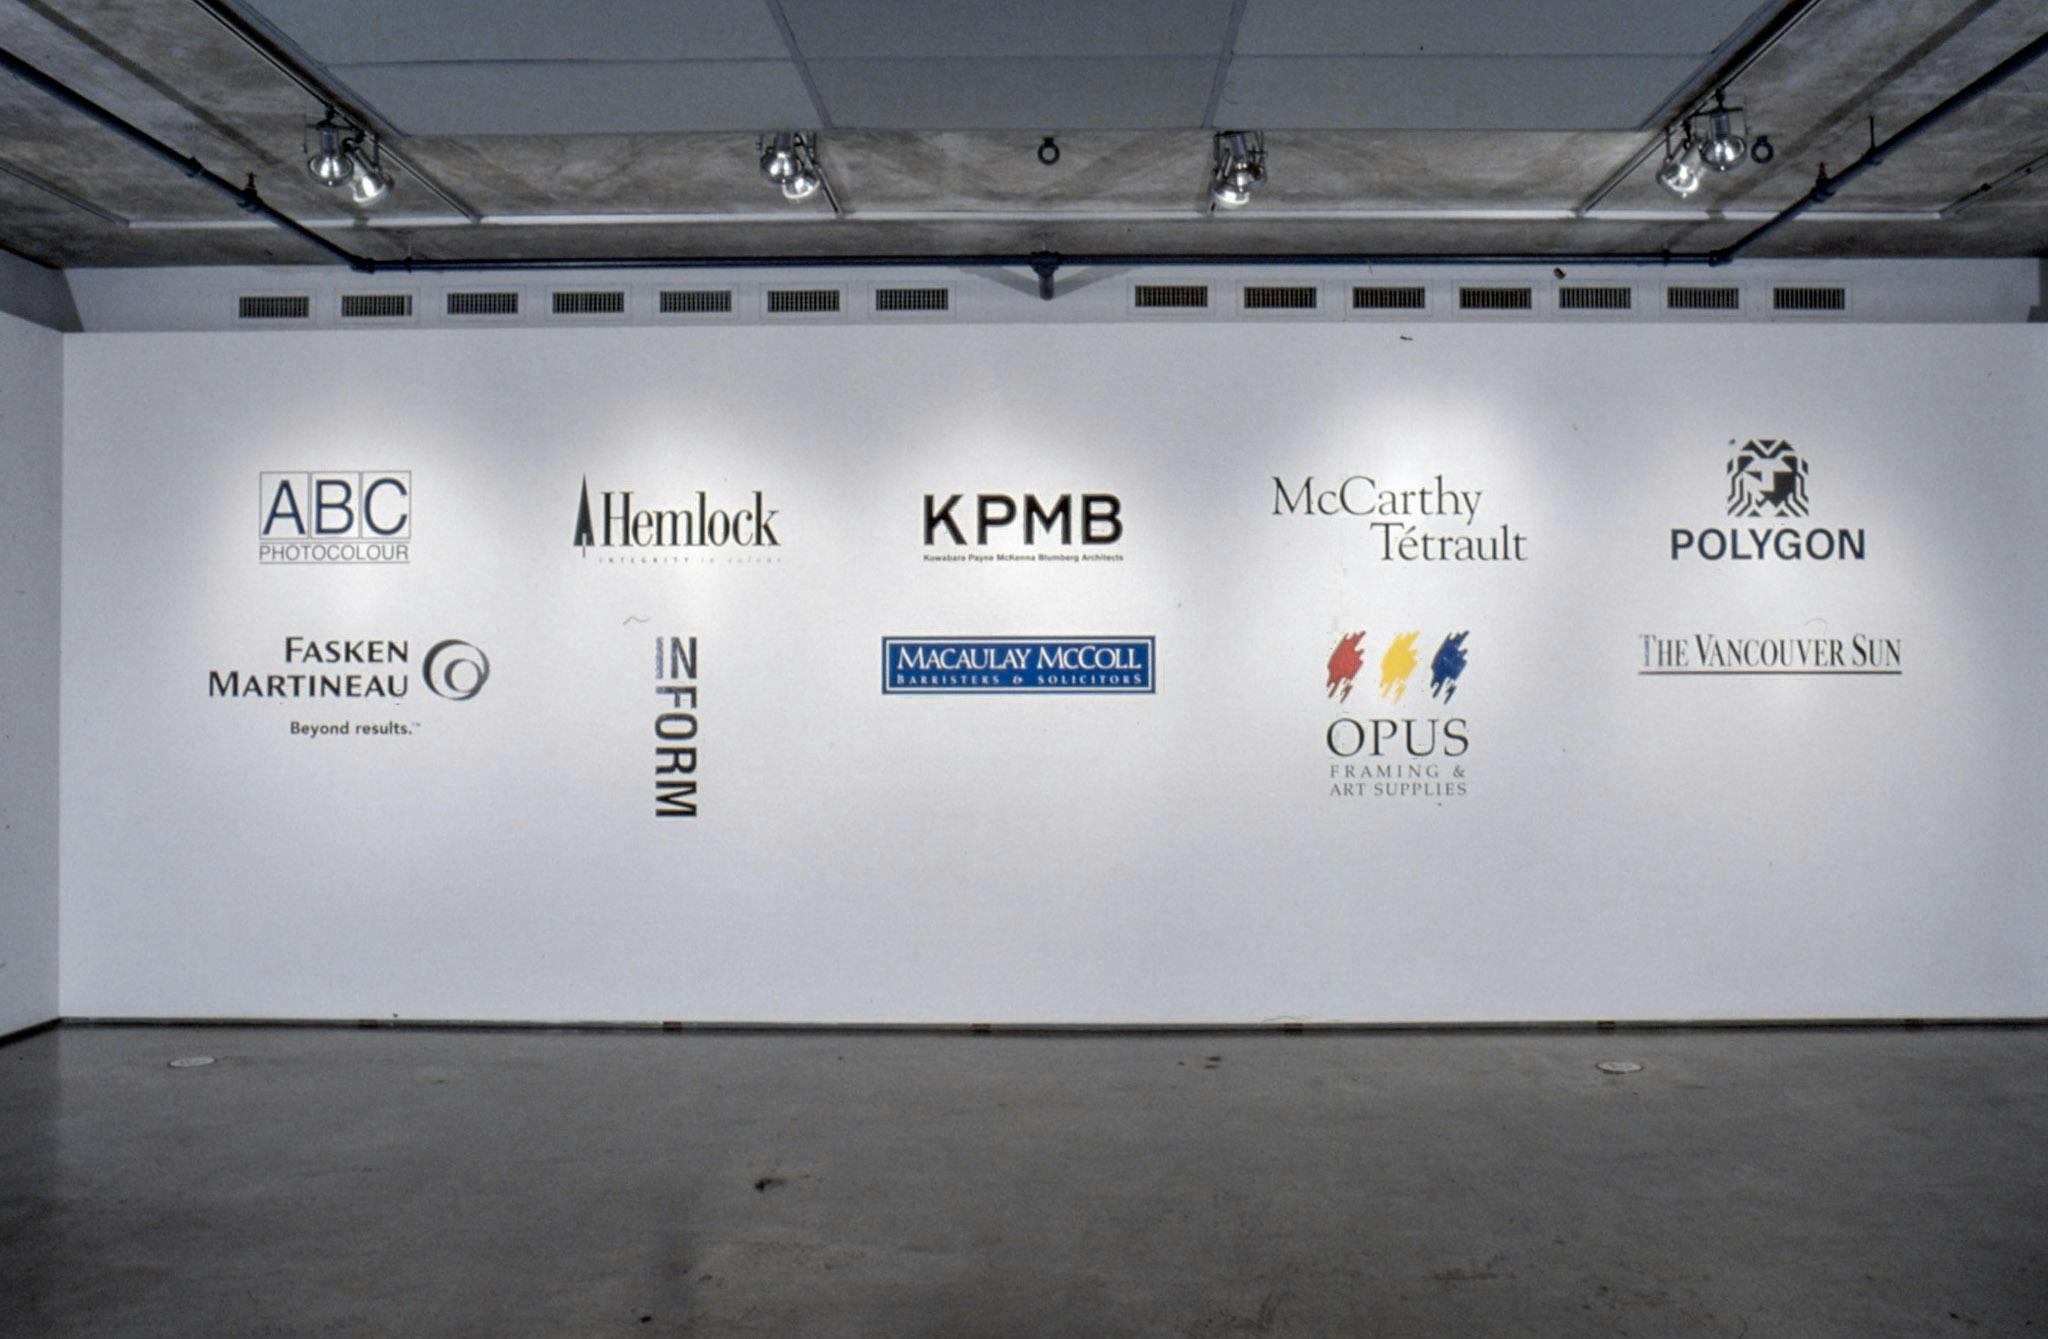 This is an installation shot of a gallery space. There are ten large-sized logos of different companies and organisations printed on a gallery wall.